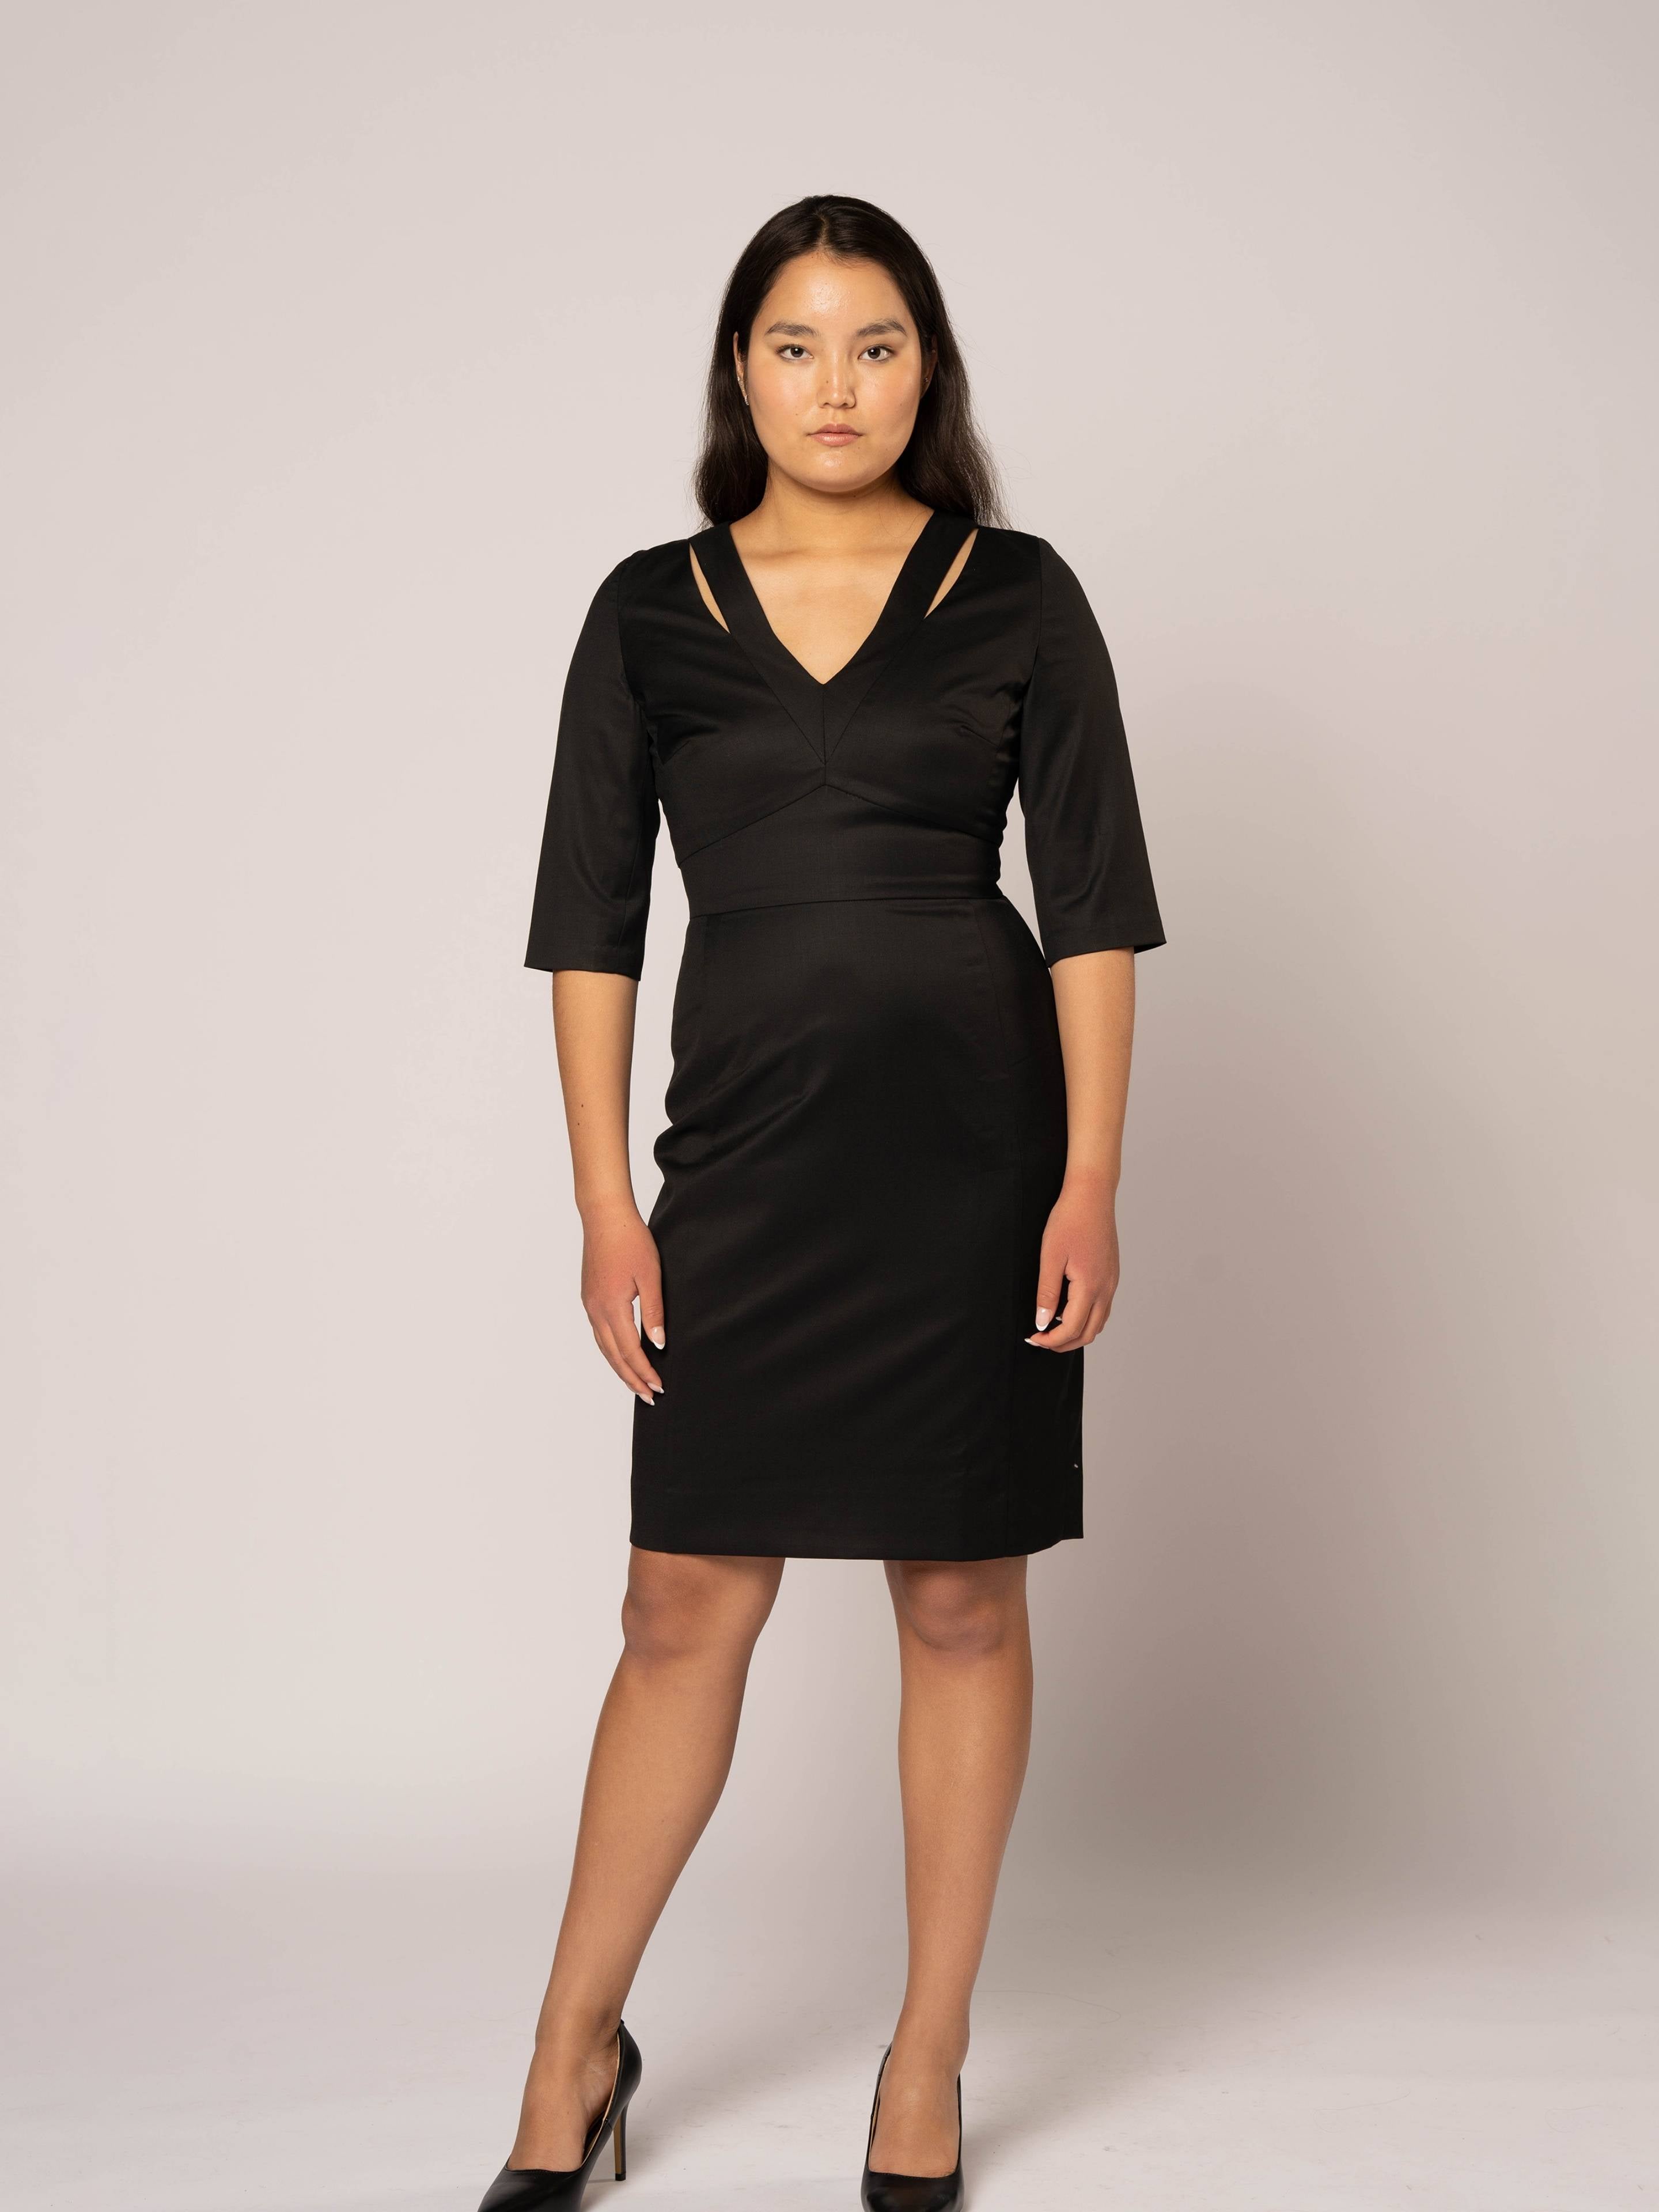 The Zoe Cut Out Dress